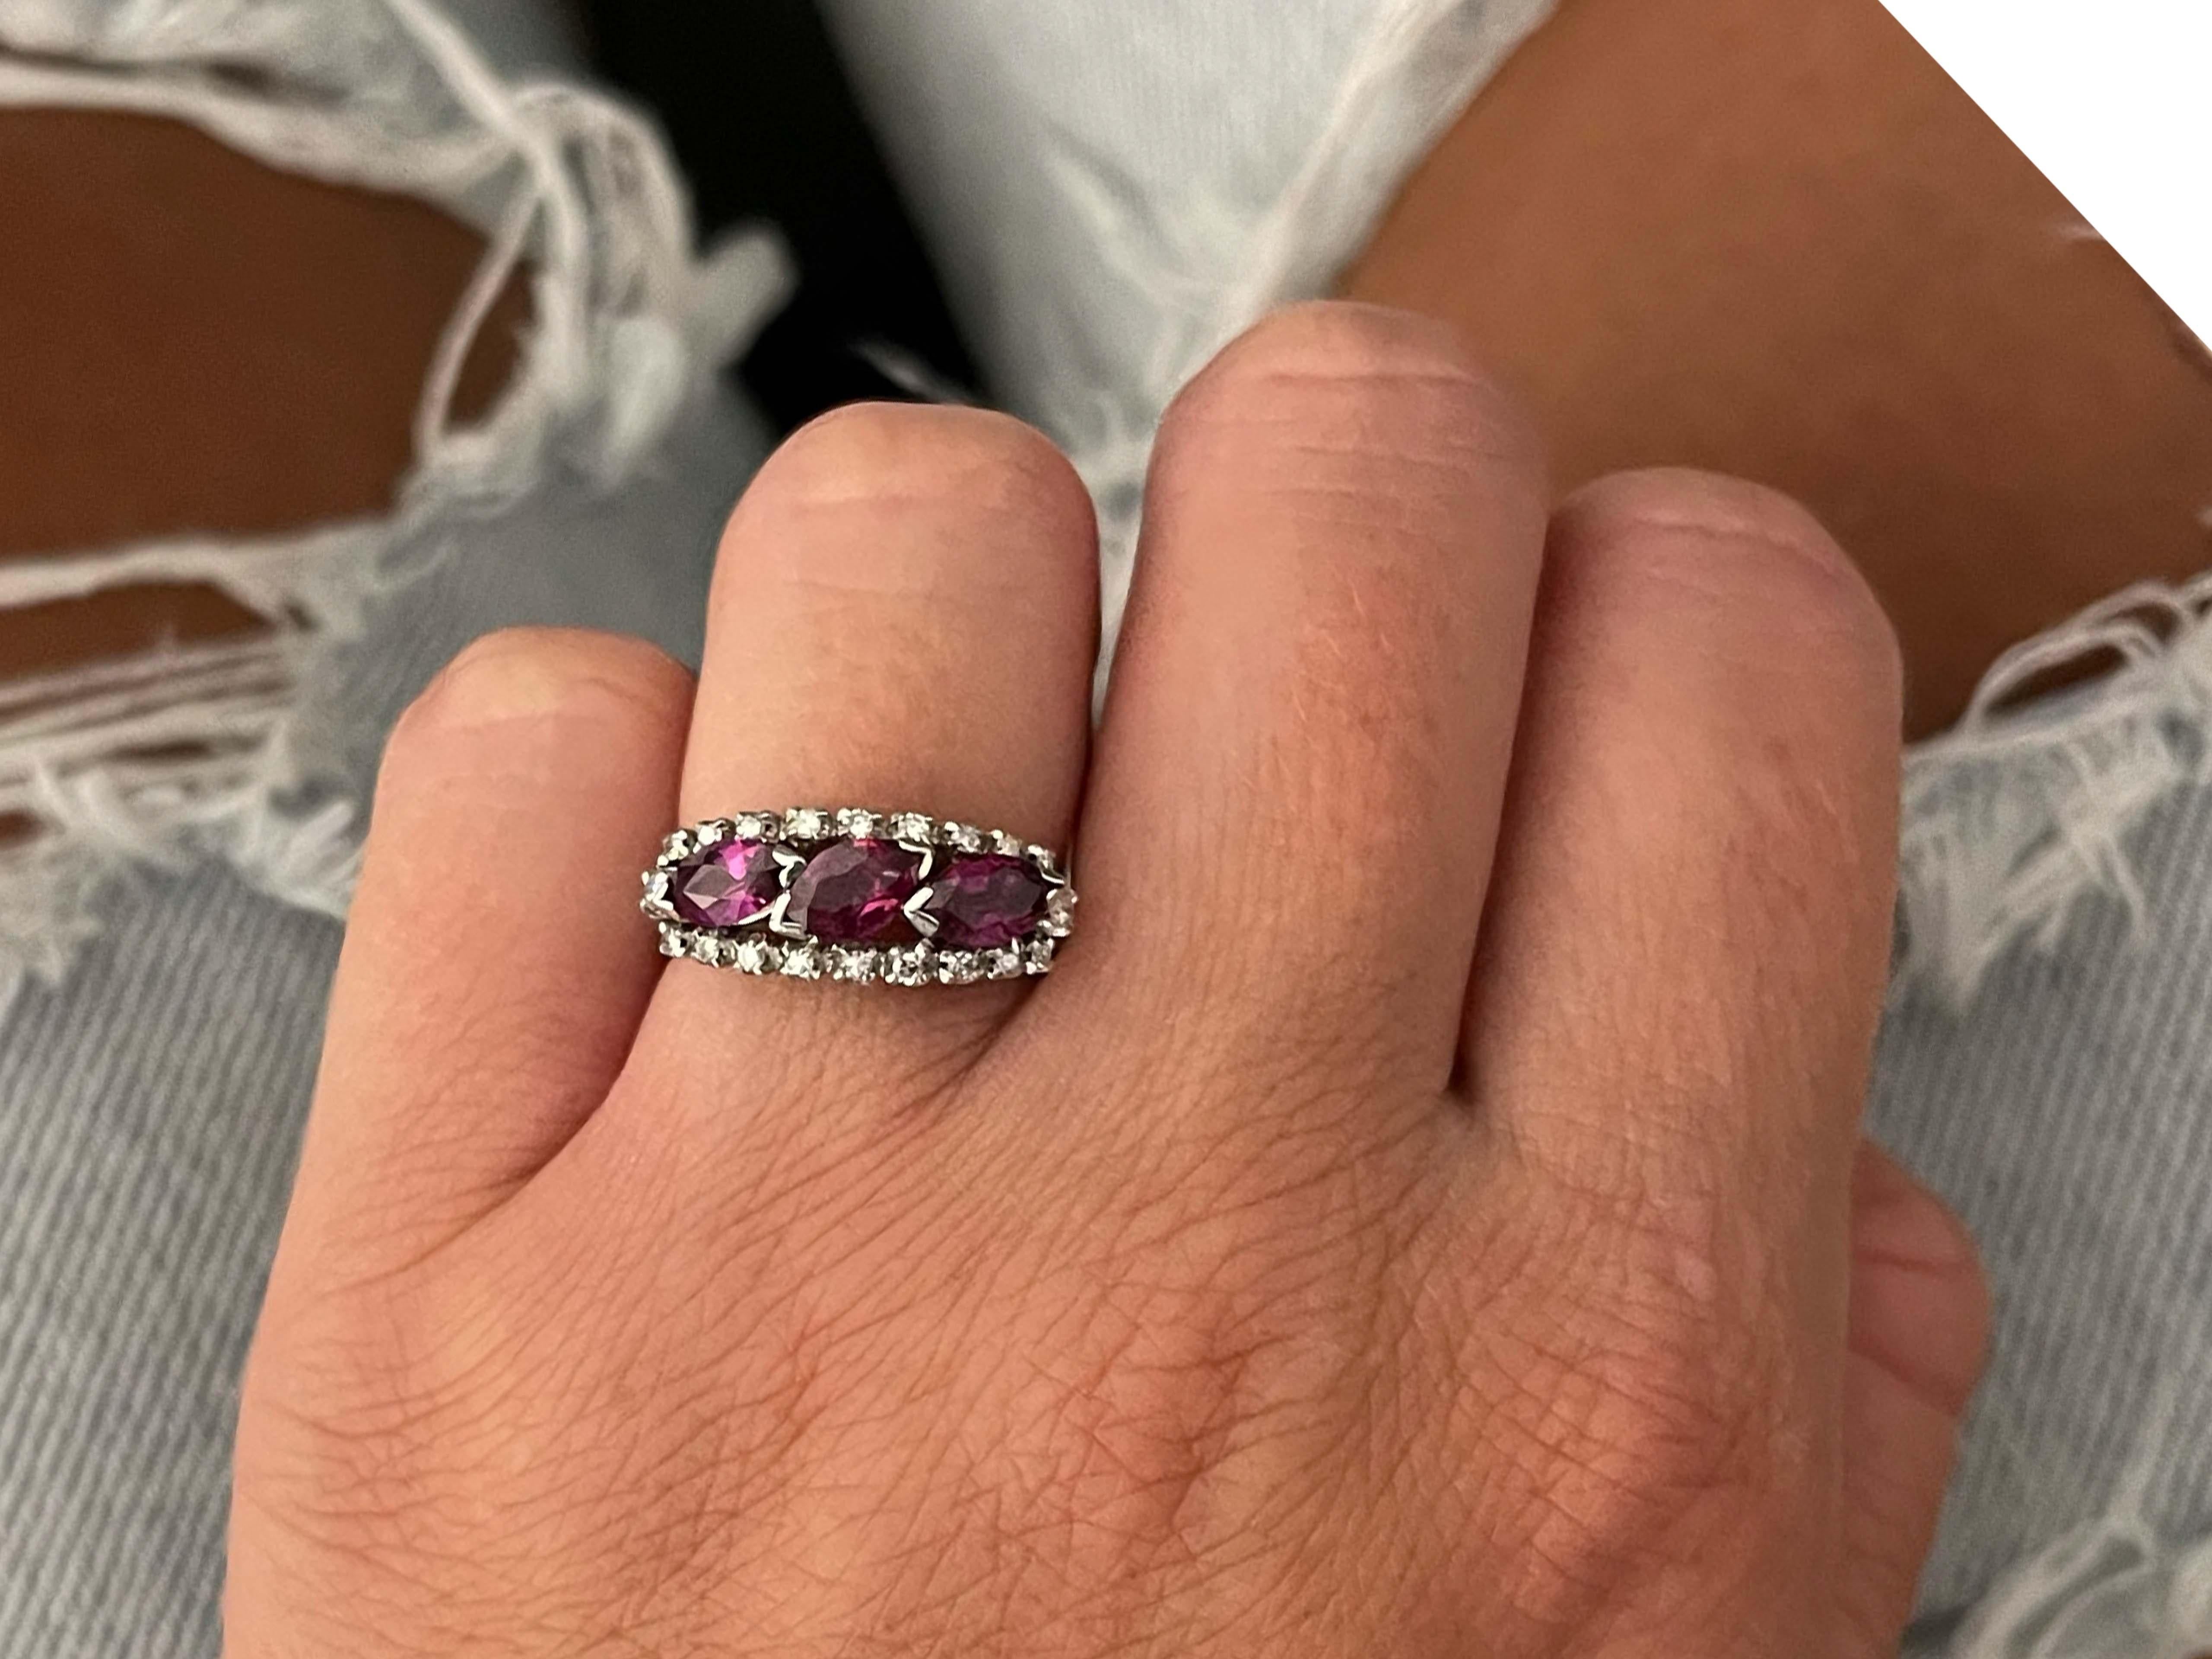 Item Specifications:

Metal: 18k White Gold

Style: Statement Ring

Ring Size: 5.5 (resizing available for a fee)

Total Weight: 4.4 Grams

Gemstone Specifications:

Gemstones: 3 marquis red rubies

Ruby Total Carat Weight: ~1.50 carats
​
​Diamond